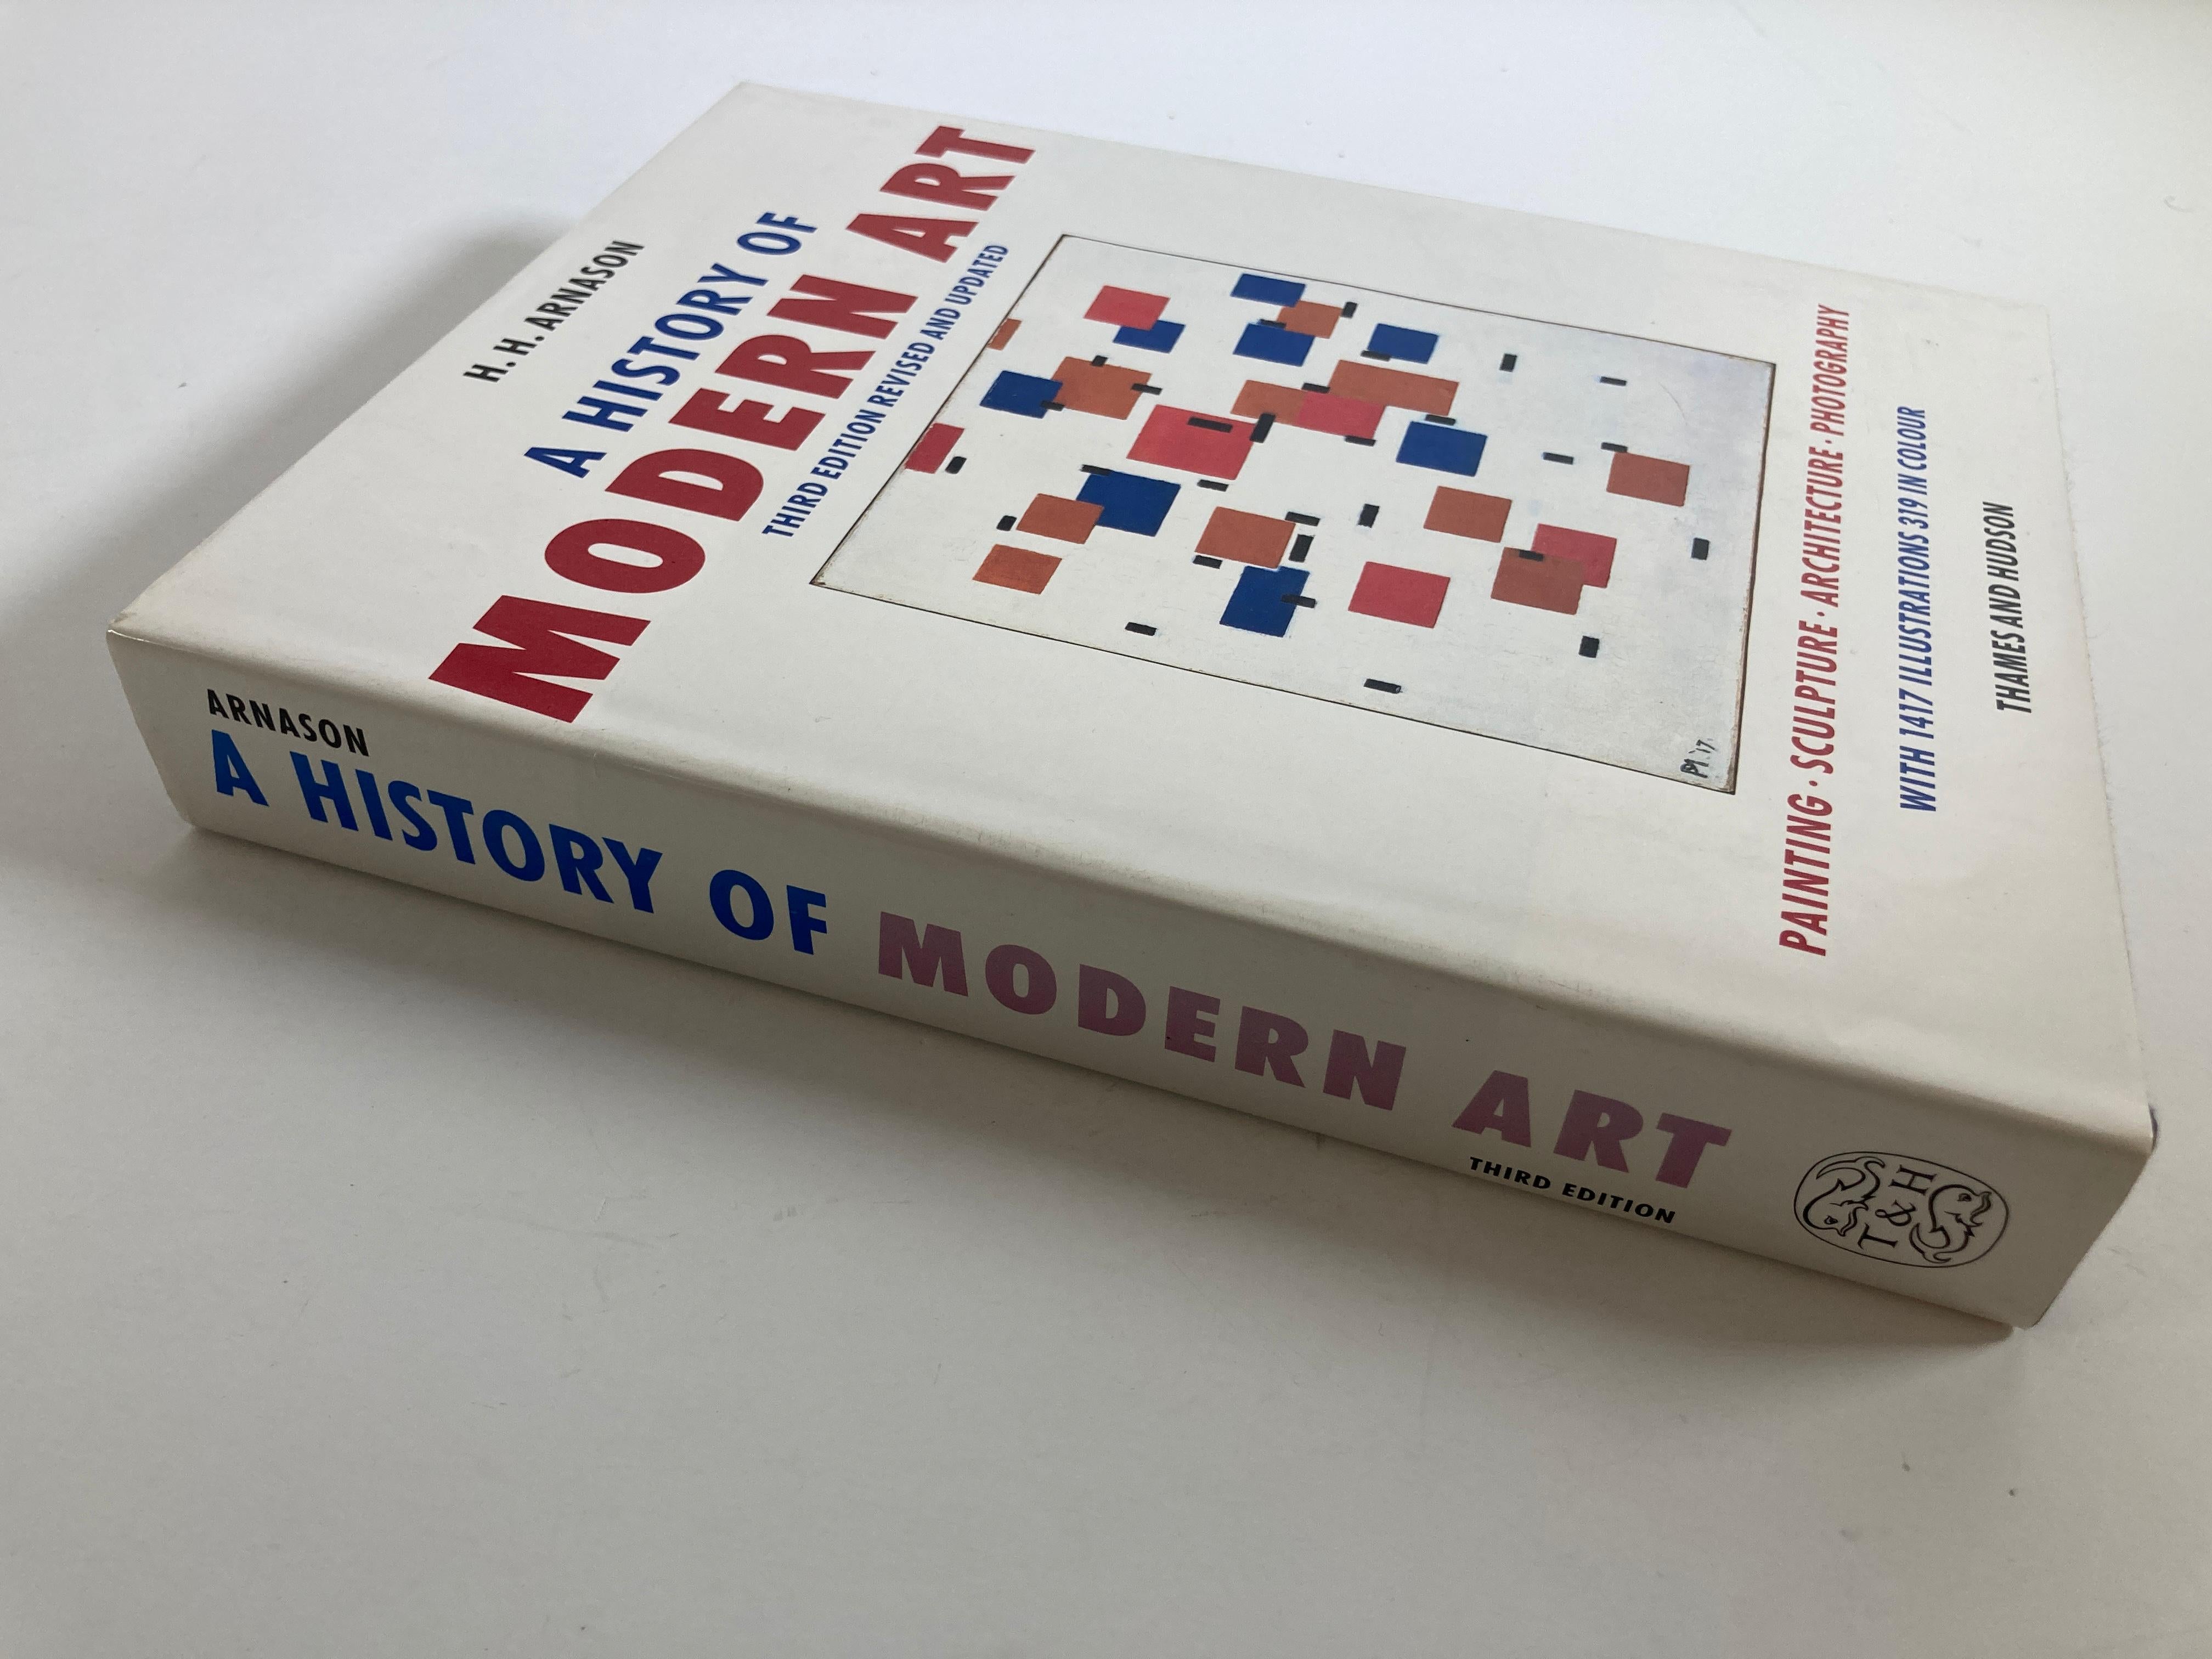 History Of Modern Art
By Arnason, H. H.; Mansfield, Elizabeth C.
For undergraduate course in Modern Art, Origins of Modernism, Art since 1945, Contemporary Art and other courses focusing on art in the 20th century. Long considered the survey of